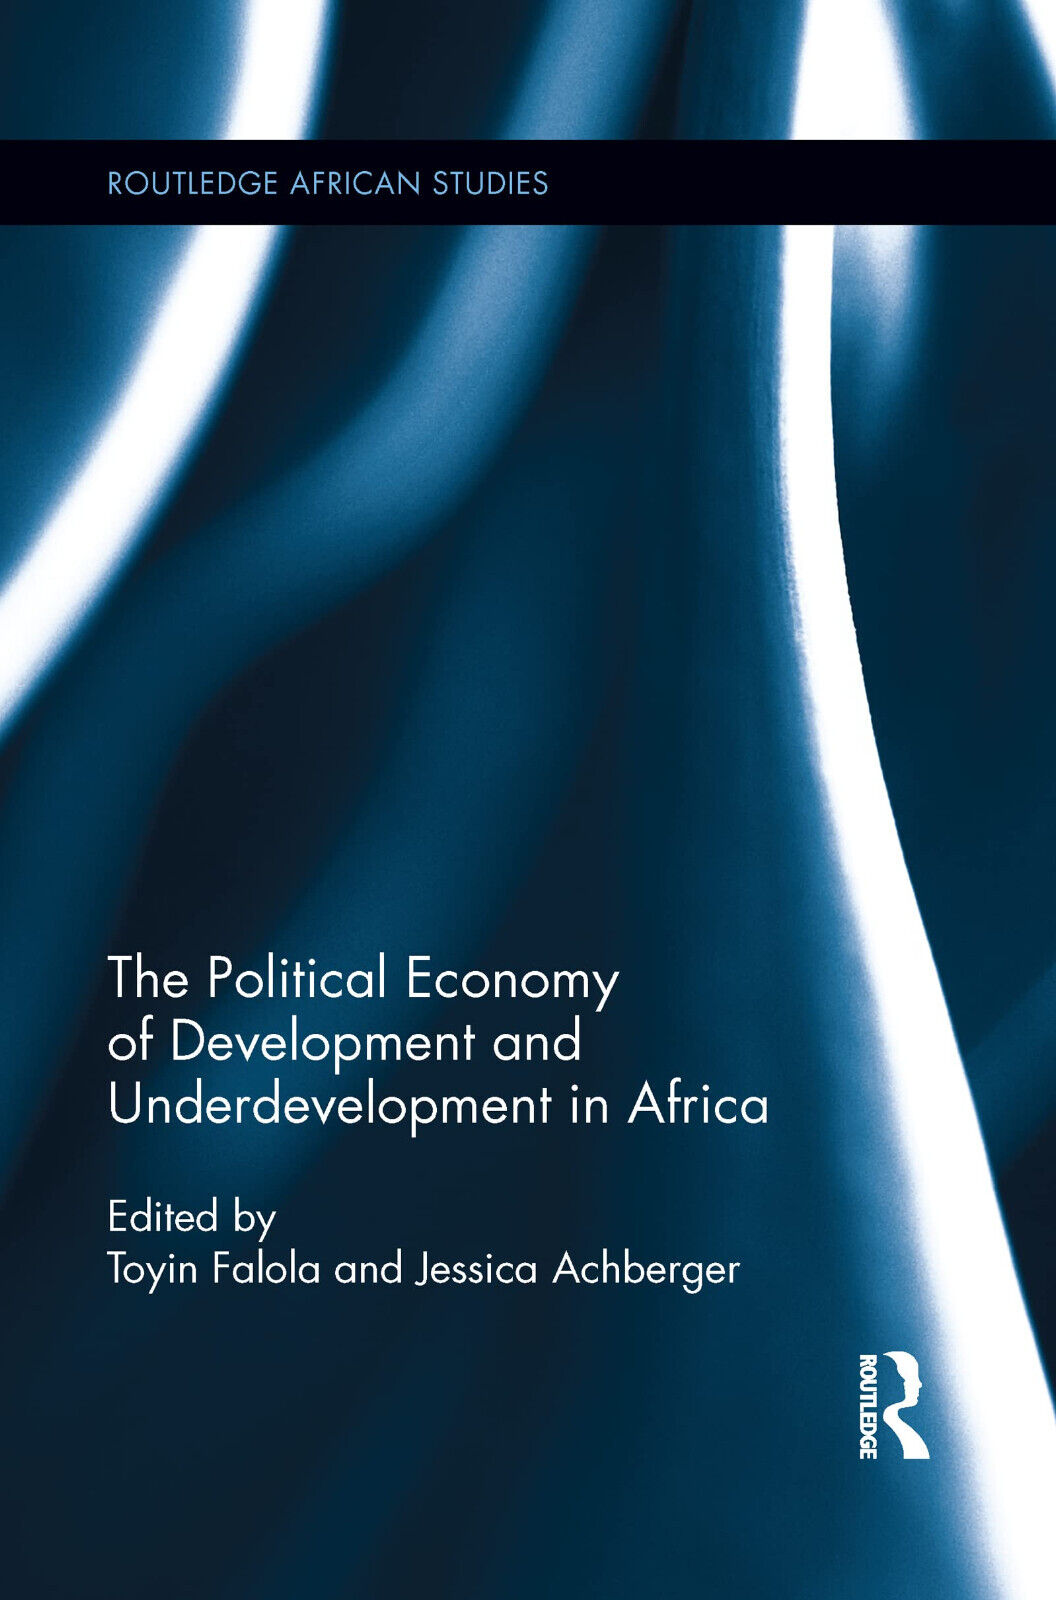 The Political Economy of Development and Underdevelopment in Africa - 2015